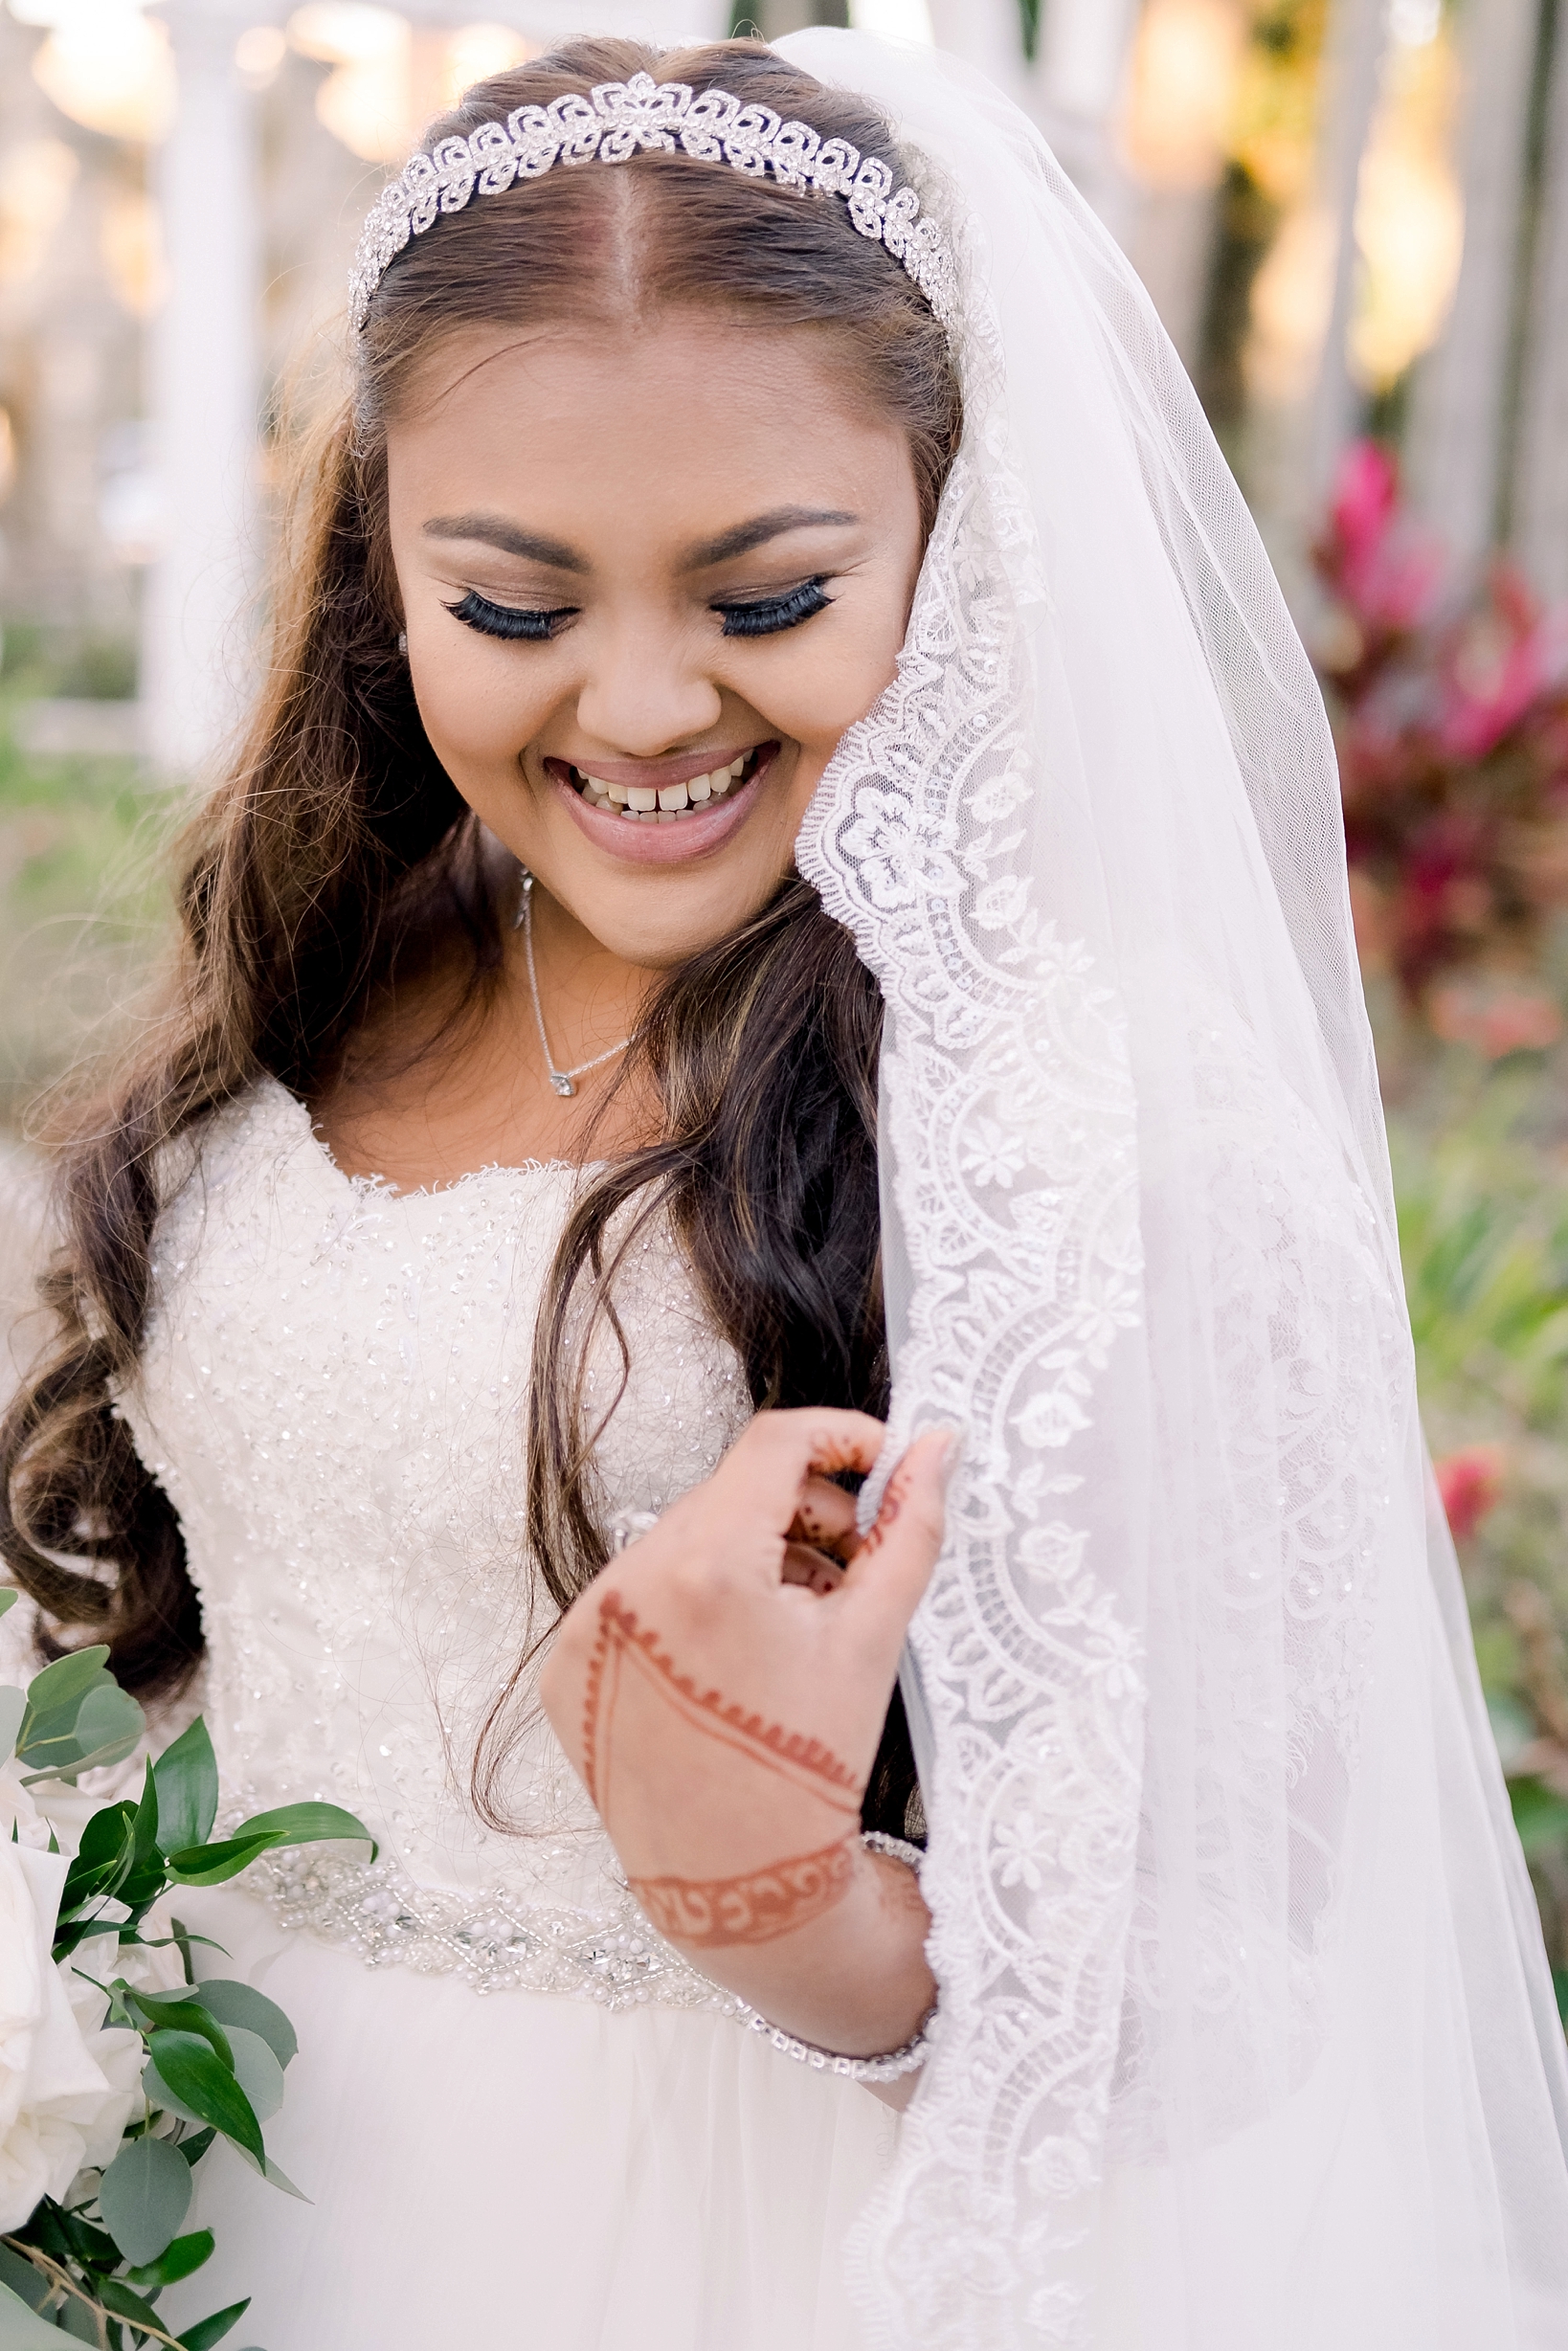 The bride laughing as she holds her wedding veil